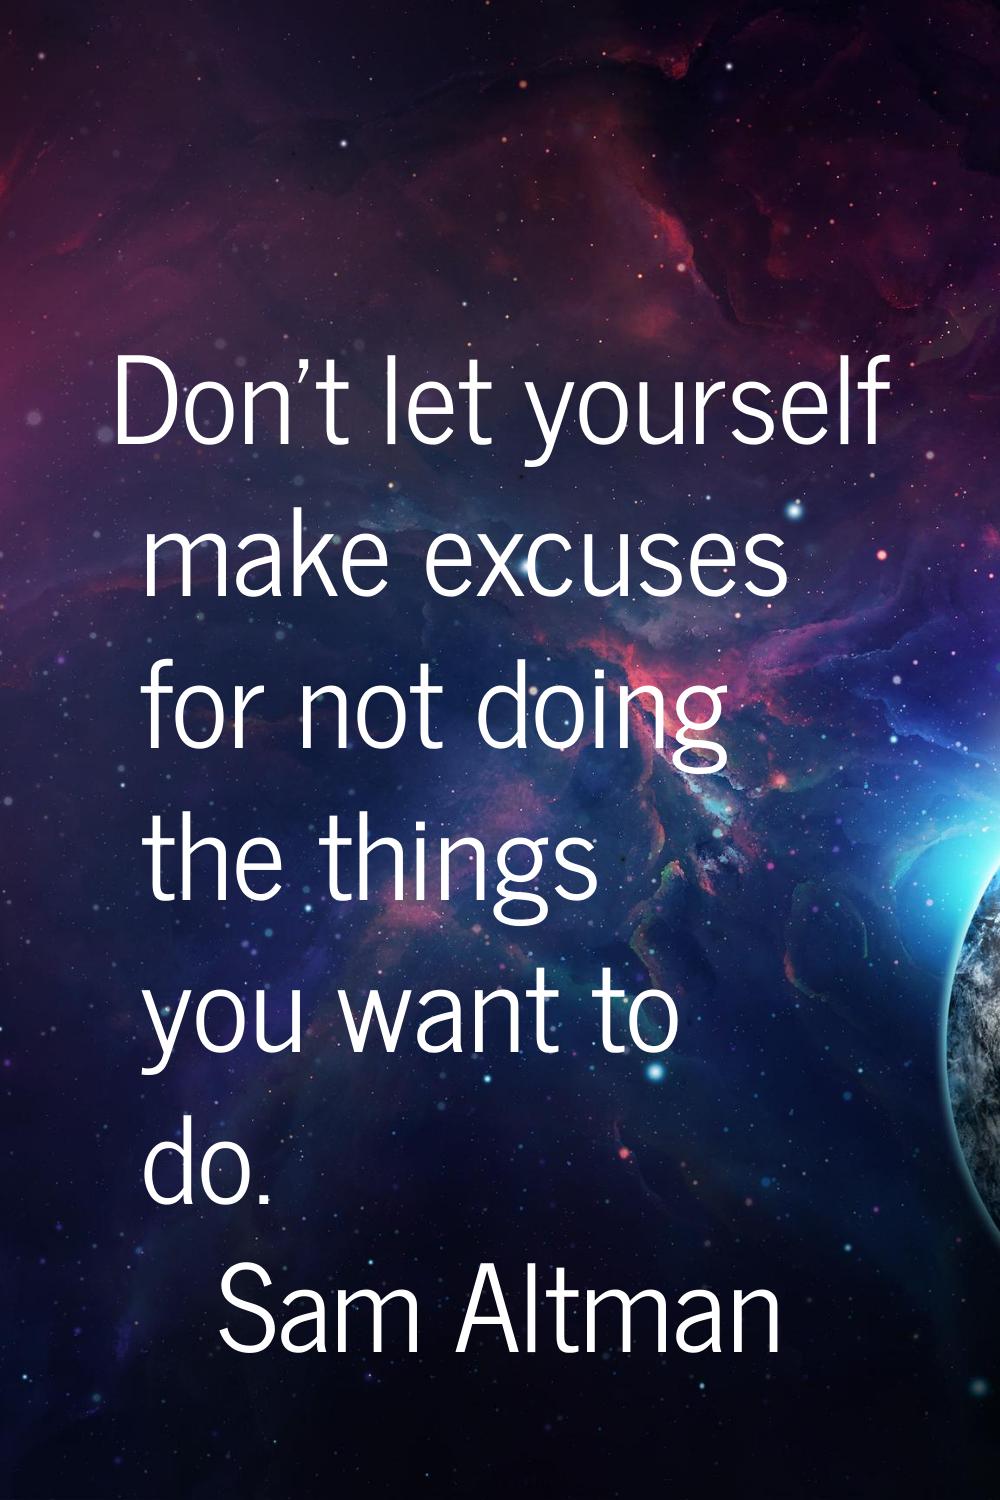 Don't let yourself make excuses for not doing the things you want to do.